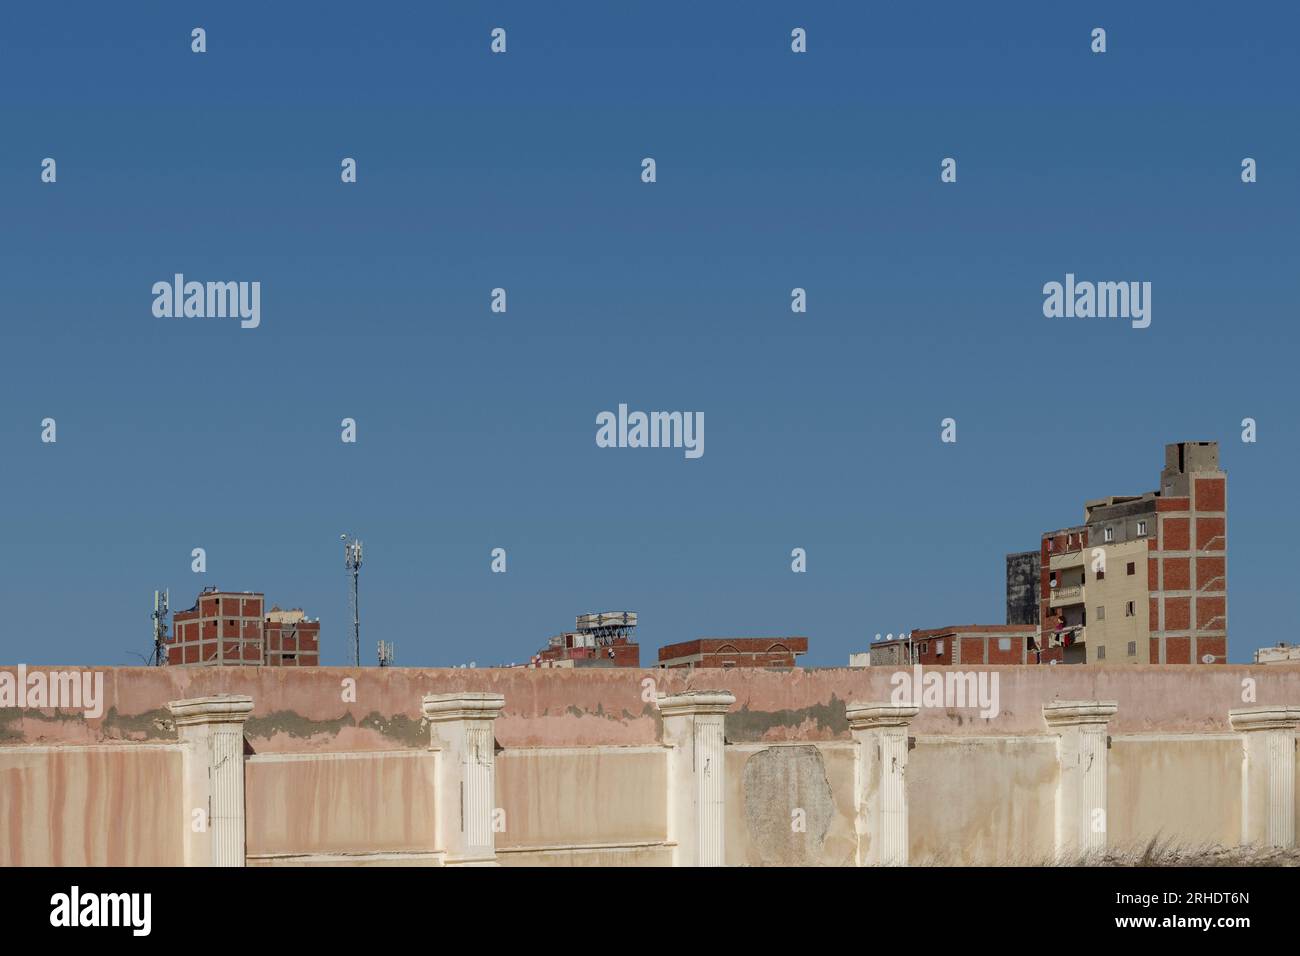 Apartment blocks in Alexandria behind a concrete wall with lots of blue sky, Egypt Stock Photo